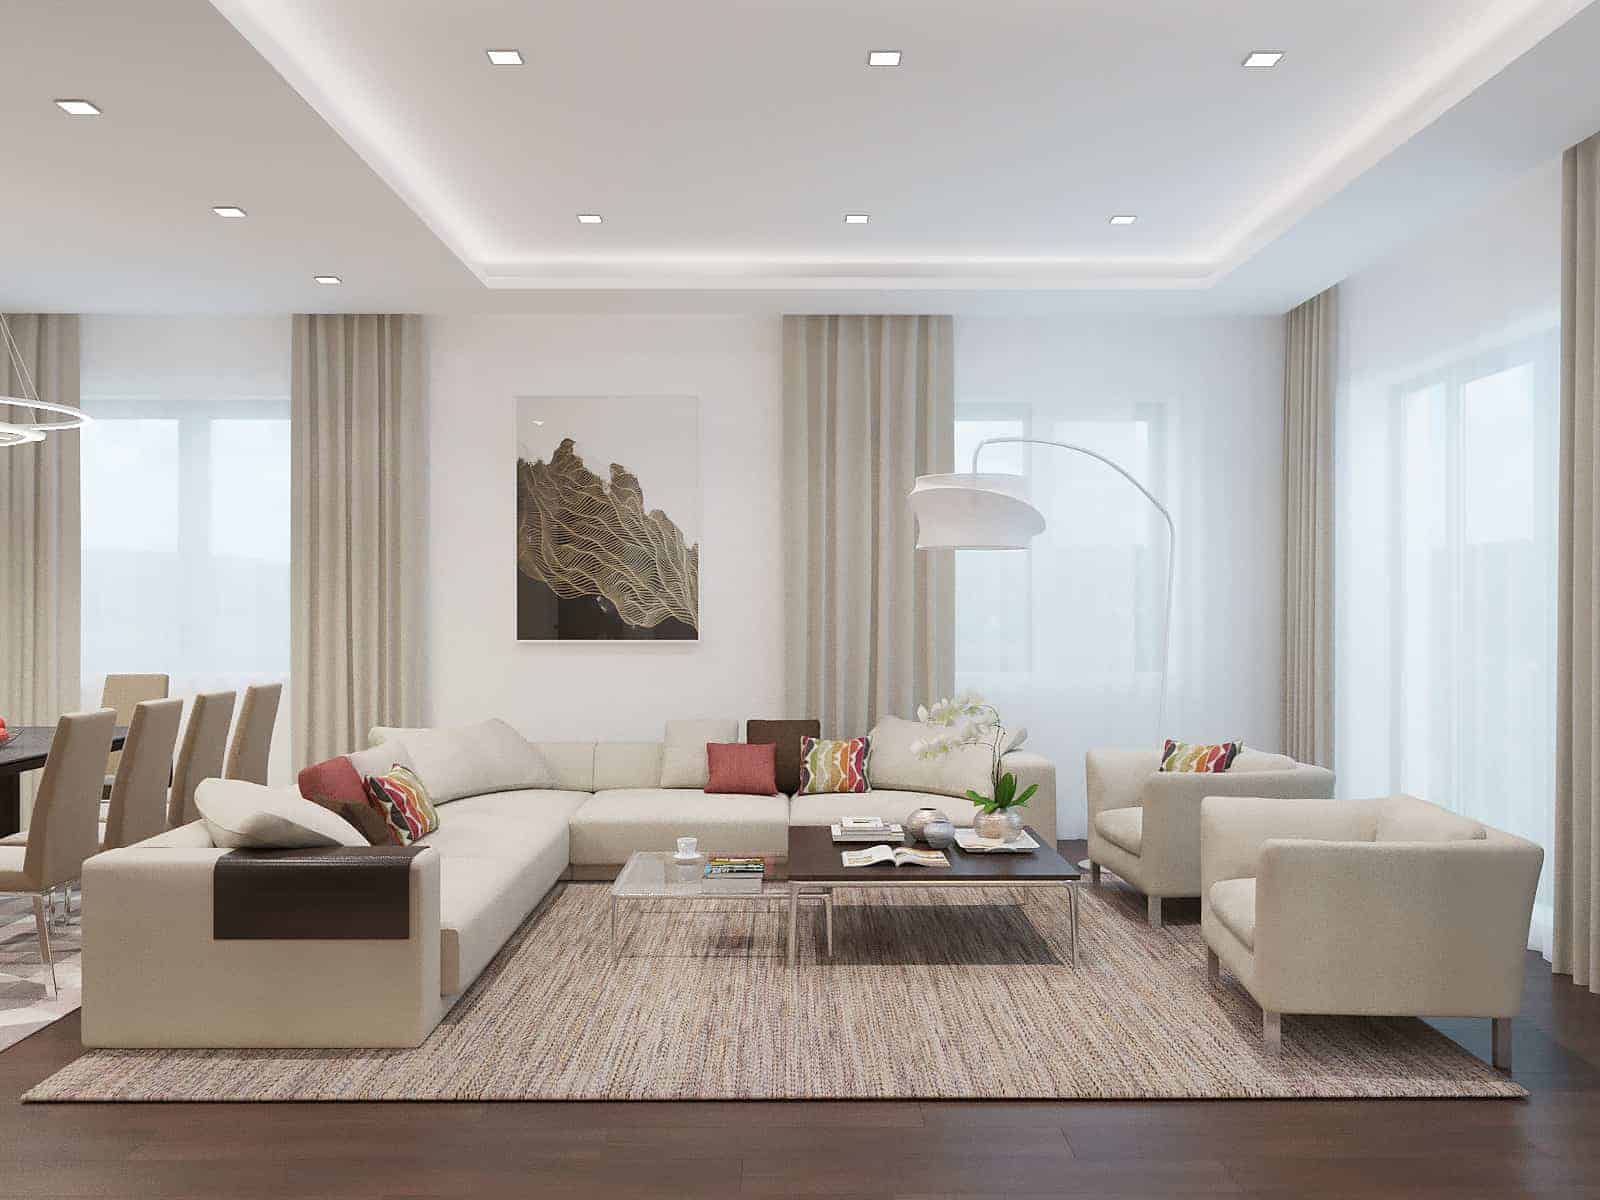 Living Room With Light Colors | Design Ideas